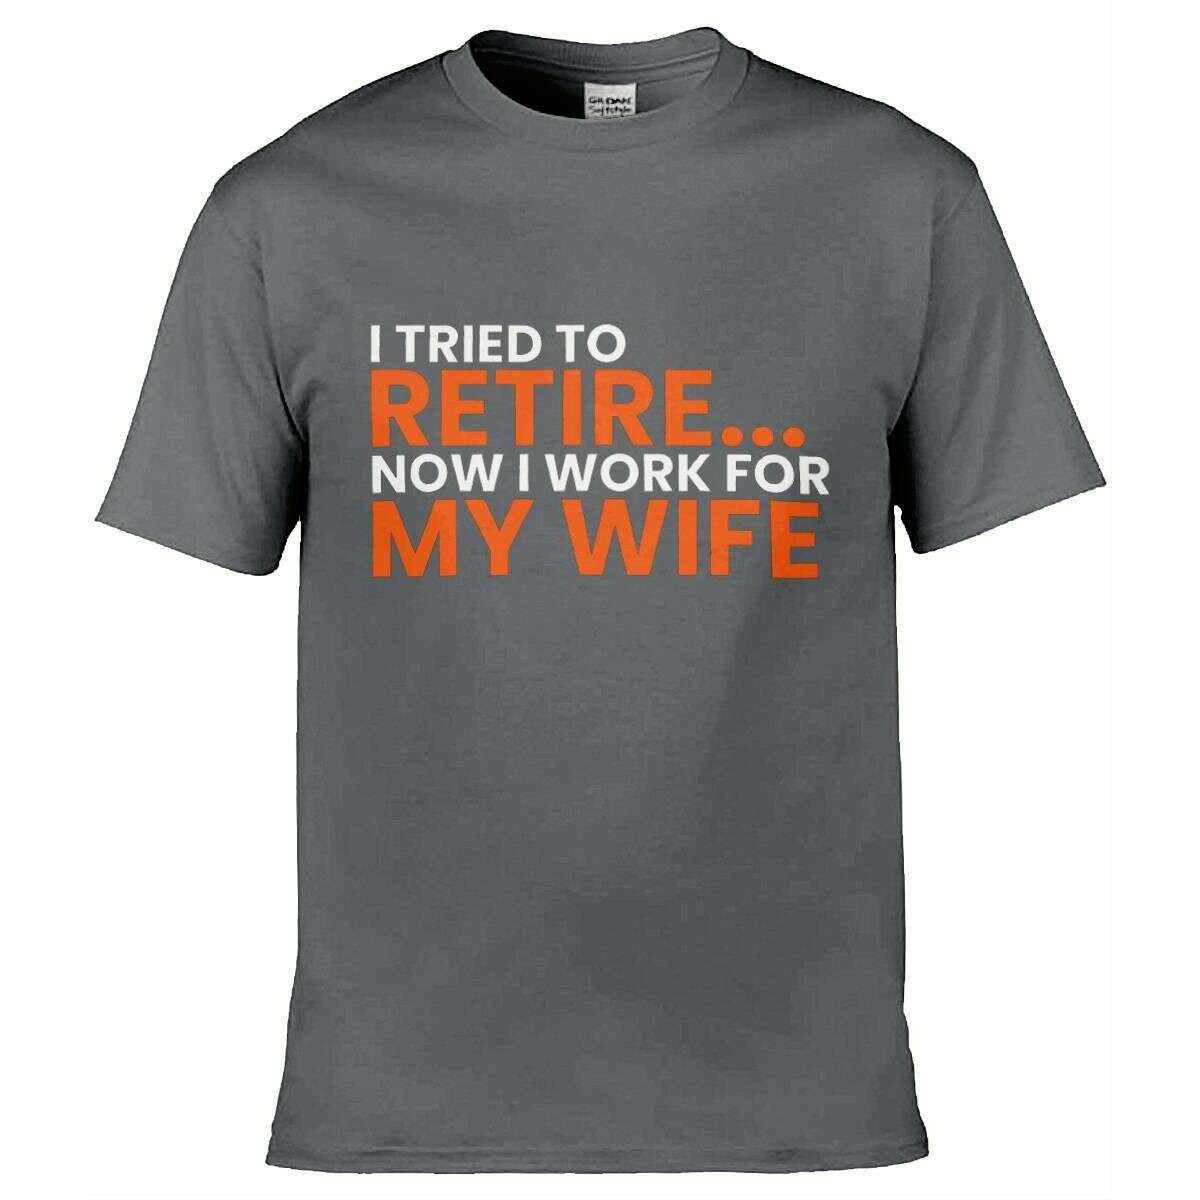 Teemarkable! I Tried To Retire Now I Work For My Wife T-Shirt